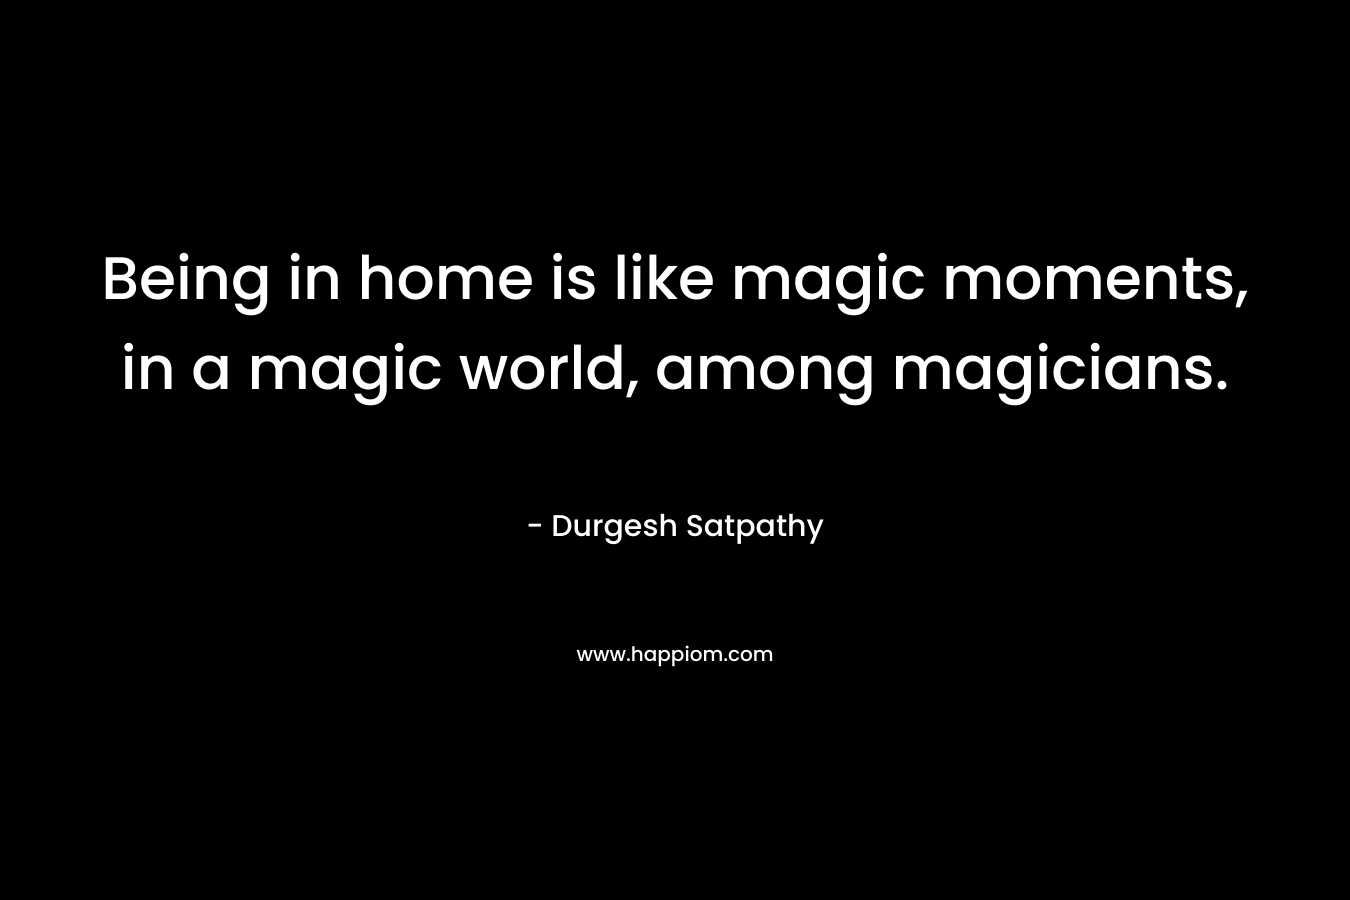 Being in home is like magic moments, in a magic world, among magicians.